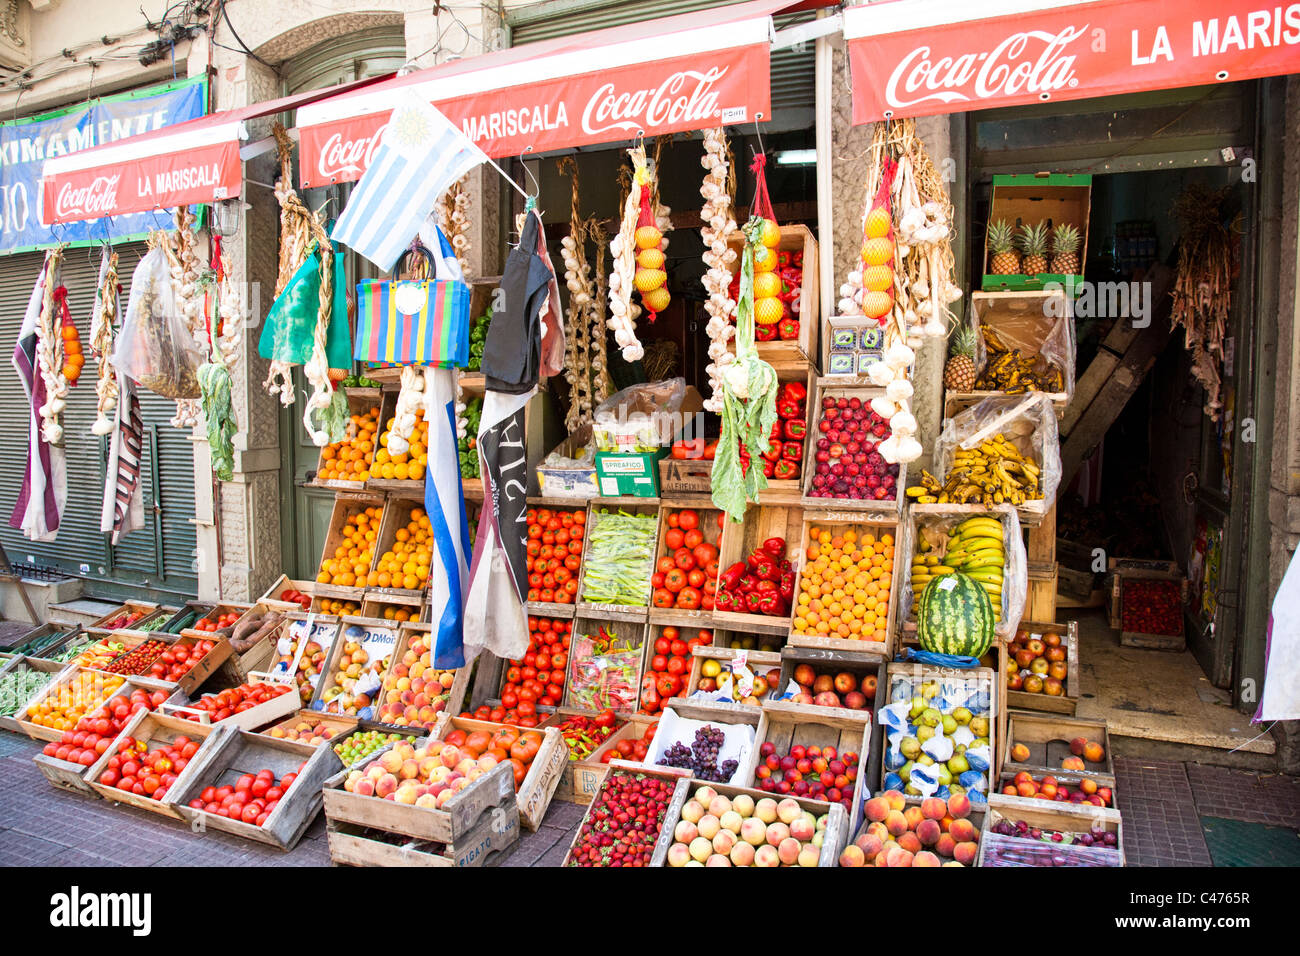 Vegetables and fruits on dispaly, Ciudad Vieja, Montevideo, Uruguay Stock Photo